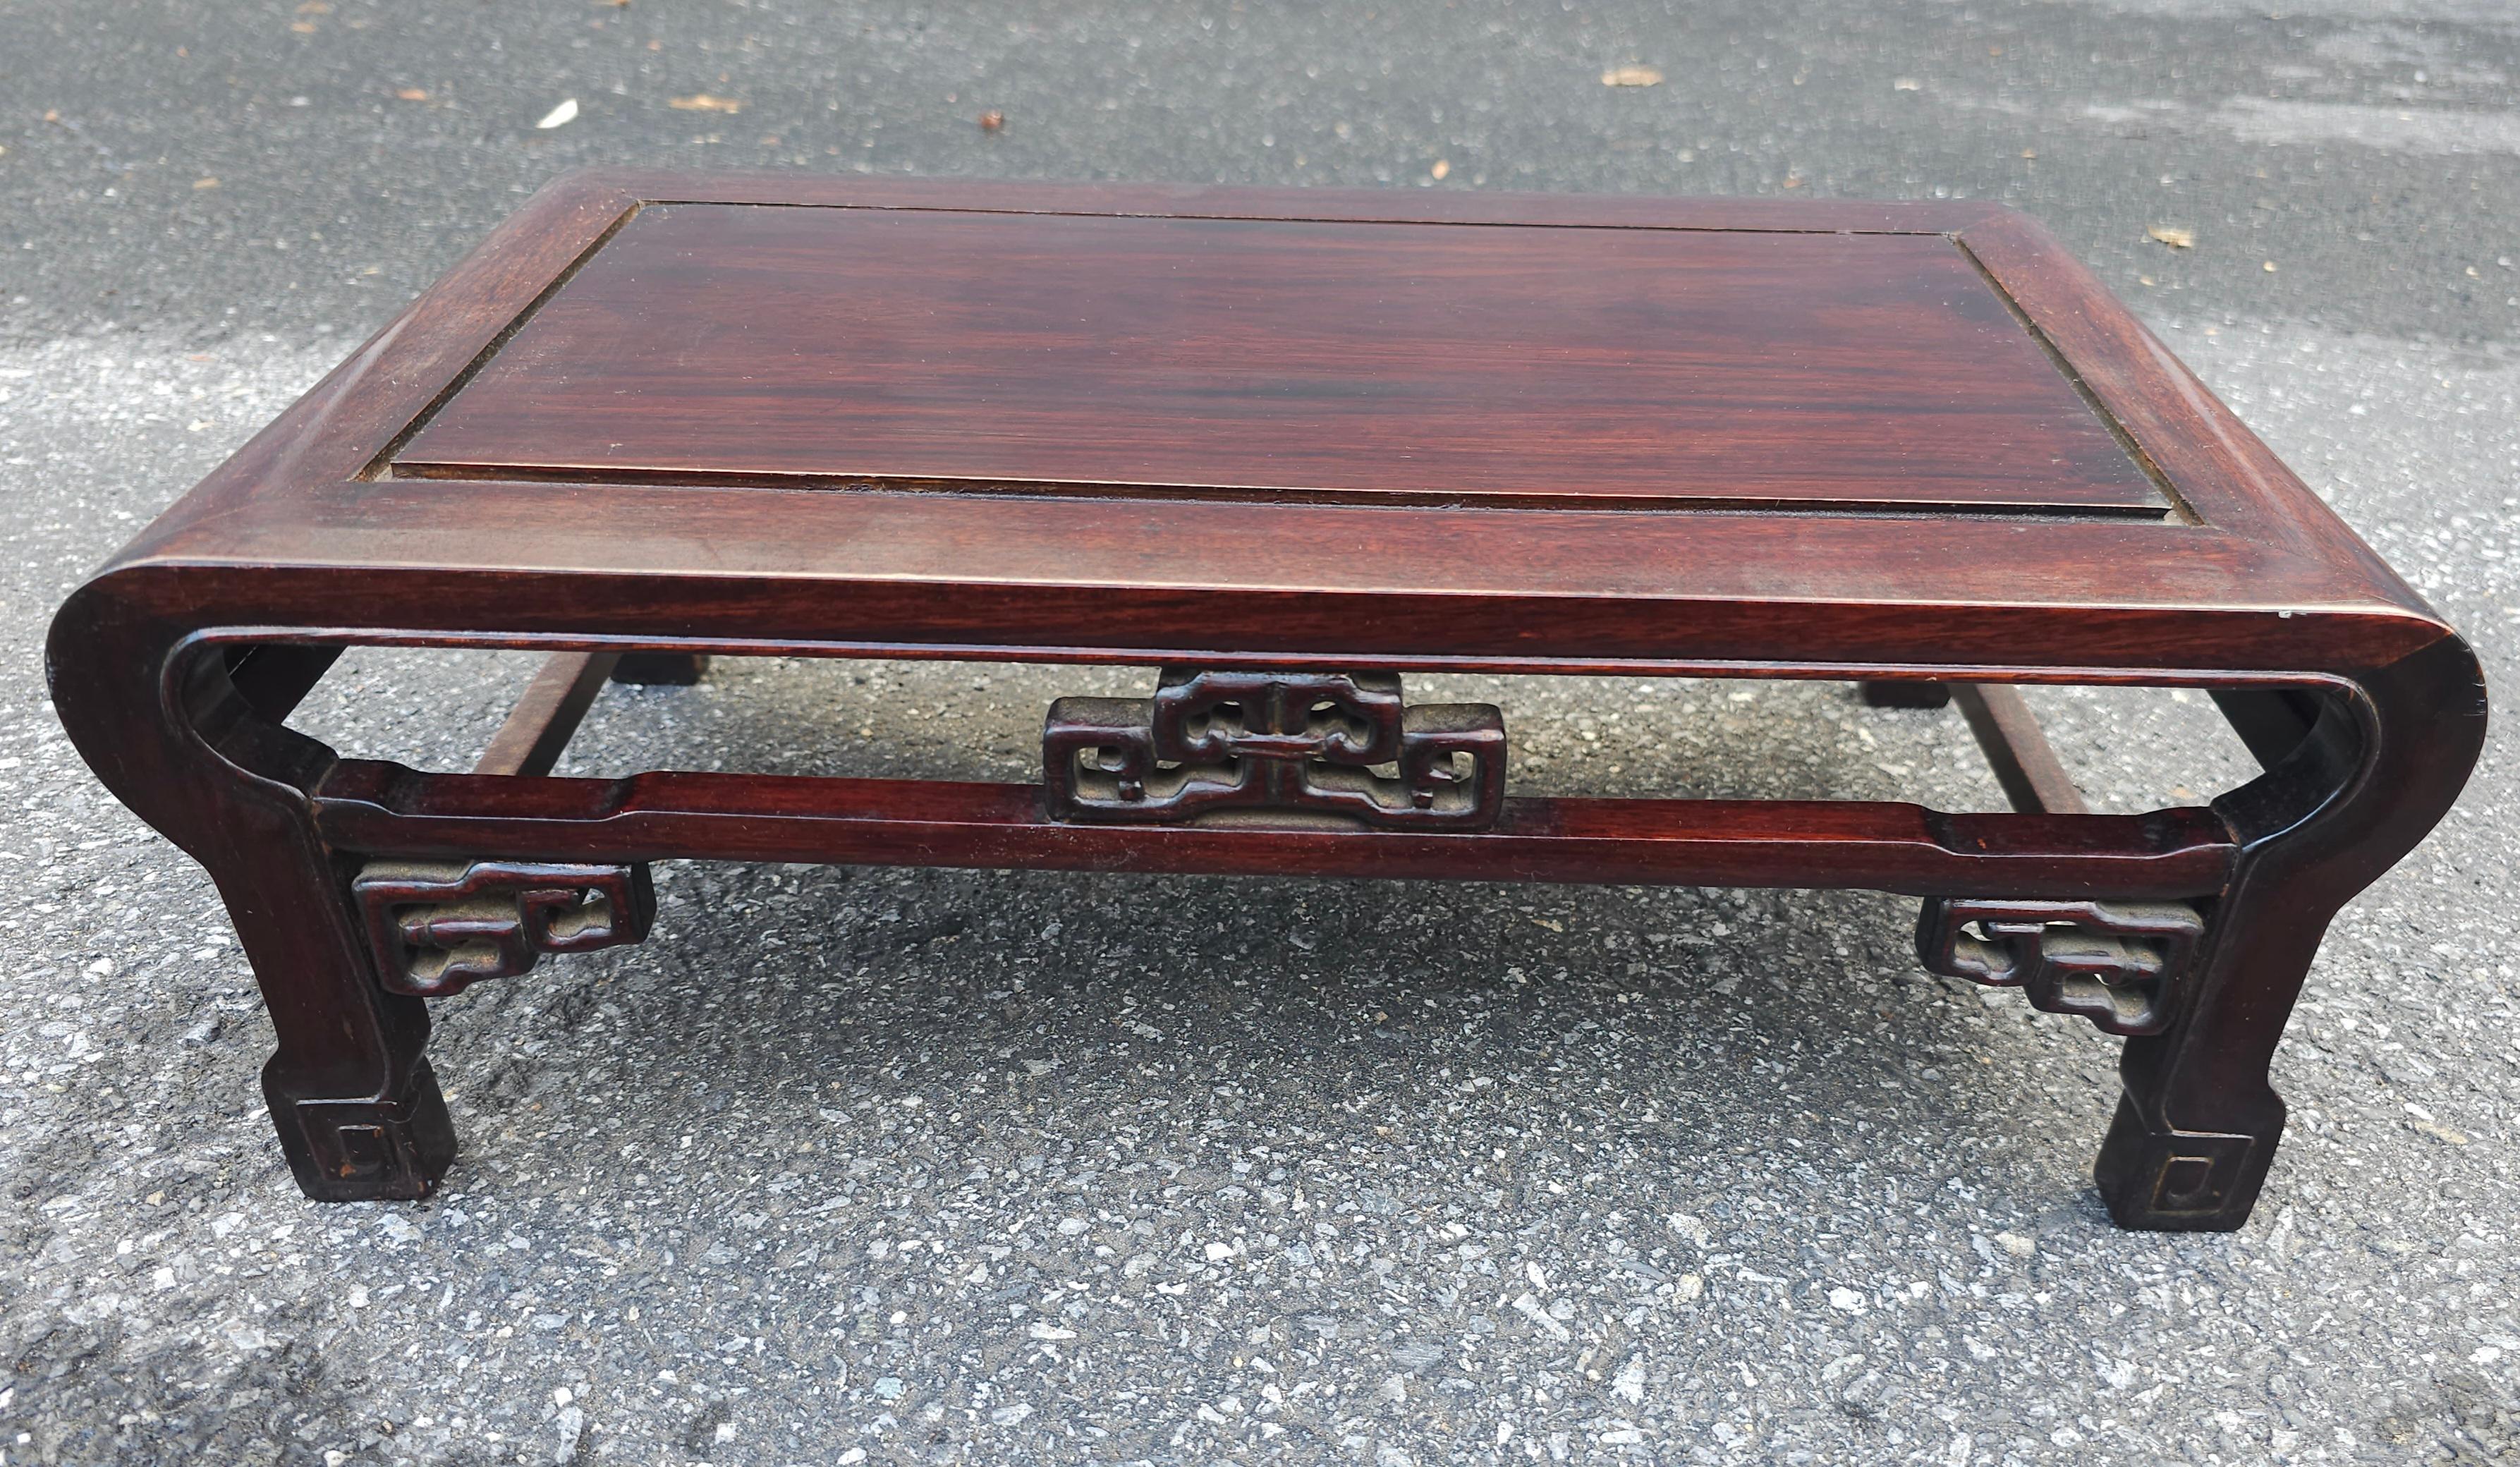 A cute Chinese Chippendale Rosewood Foot Stool or Bonsai Tree Plant Stand in good vintage condition. Measures 18